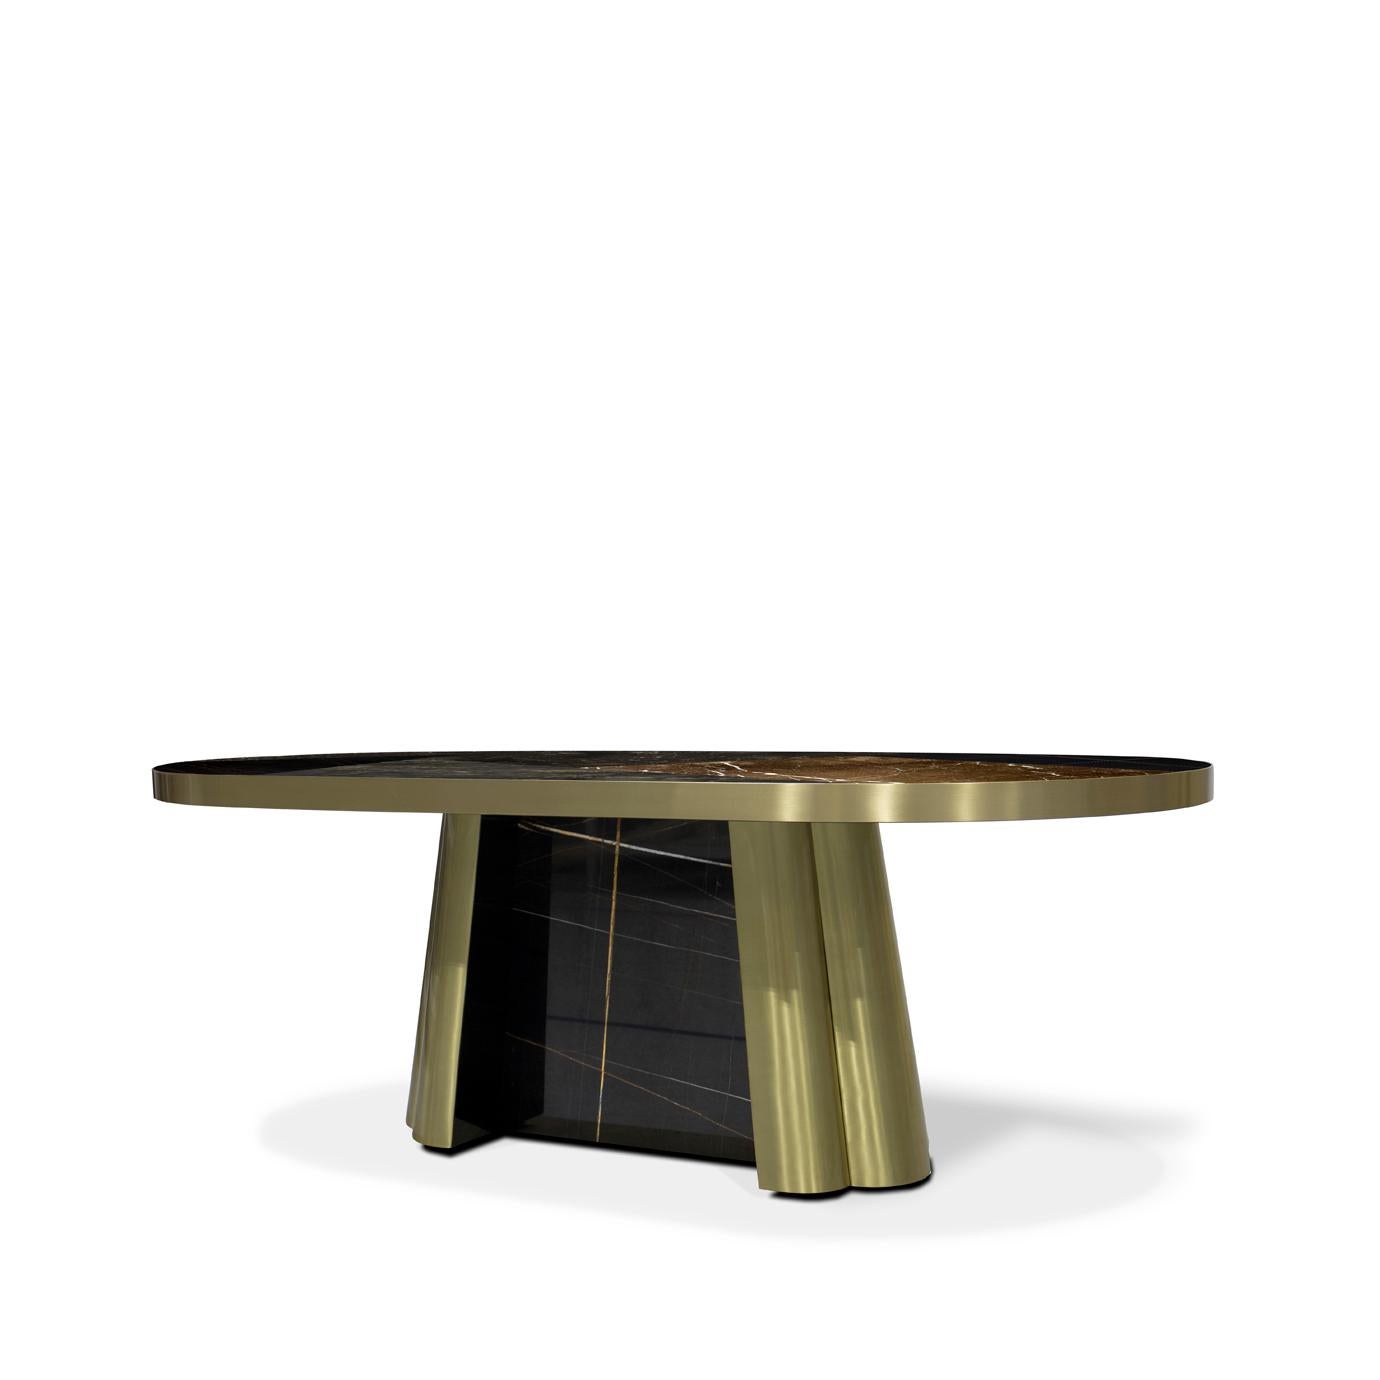 Coupled with a stunning satin brass base, the striking, geometric patchwork marble top conveys a sense of bold elegance to any dining area. Dine lavishly in the presence of Decodiva.